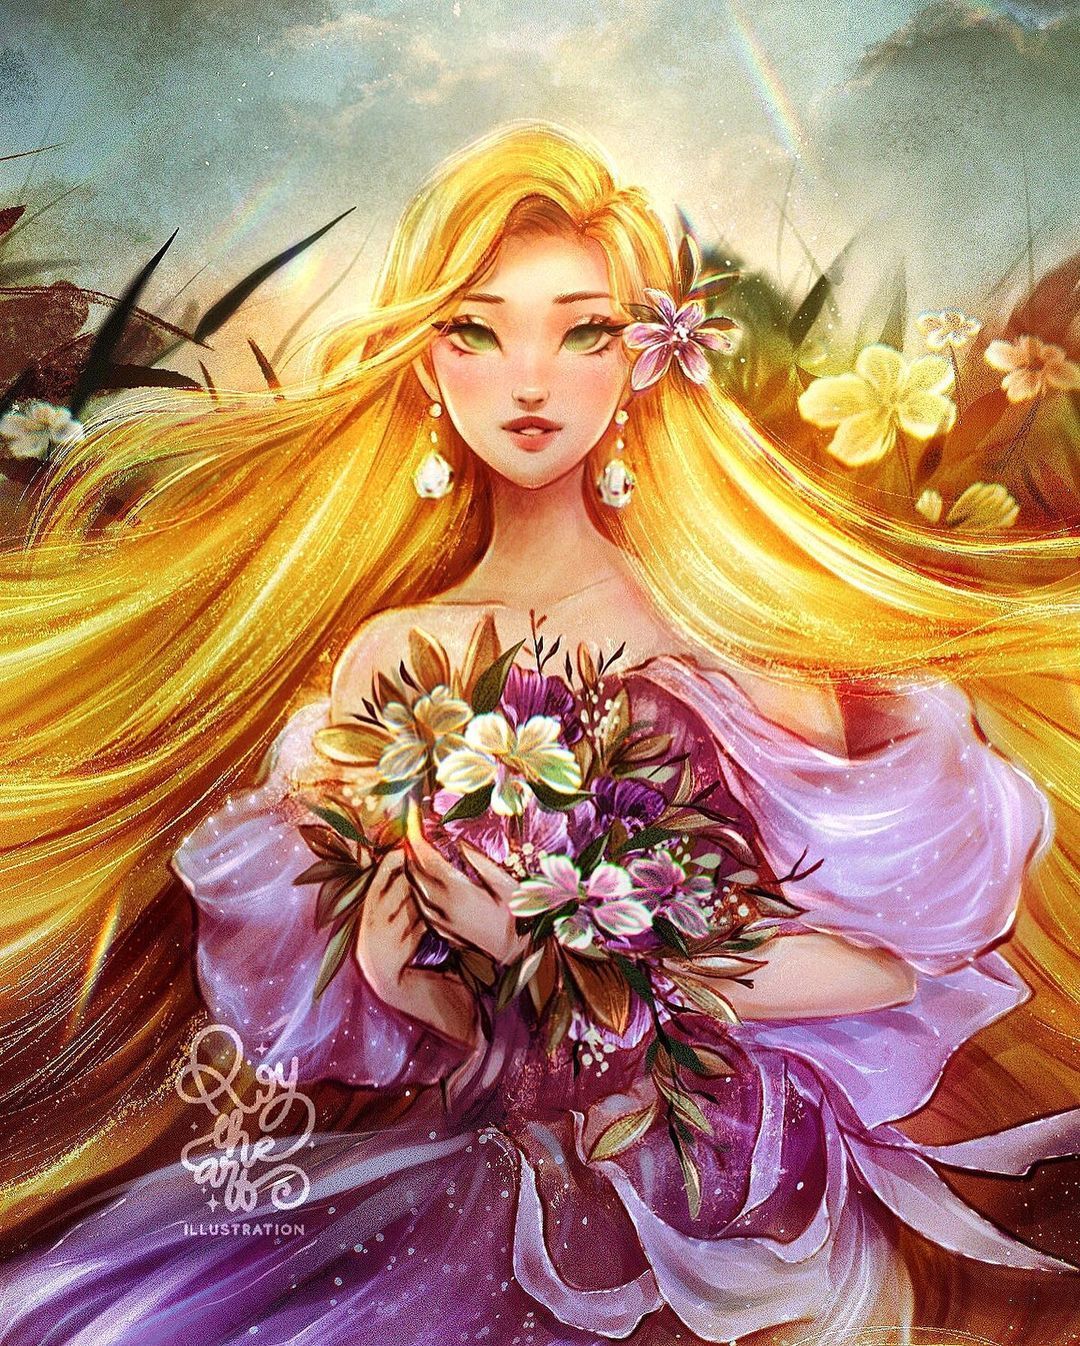 ROY THE ART • Instagram photo and videos. Disney princess art, Disney princess fan art, Disney princess paintings